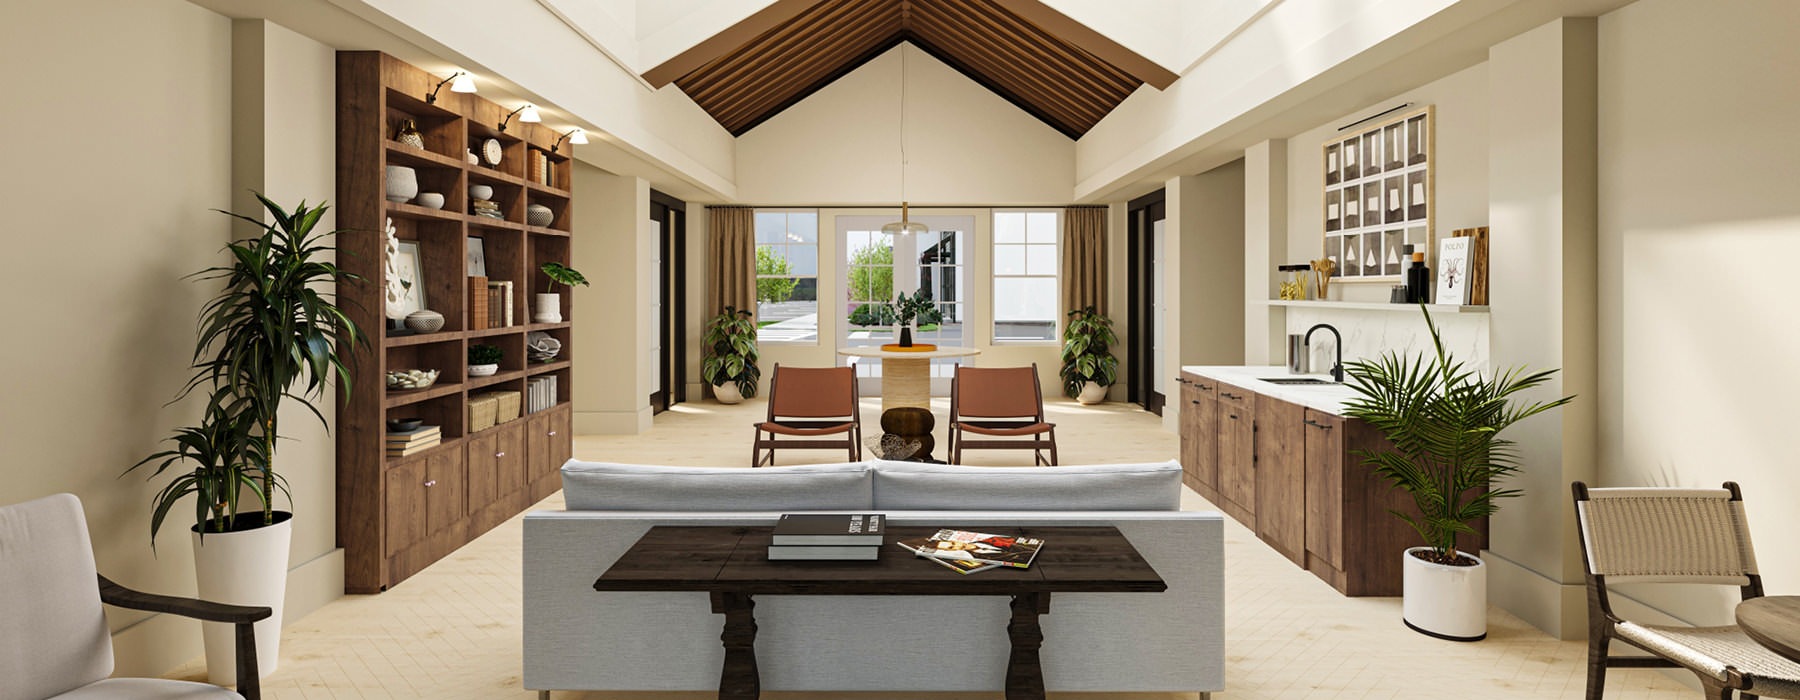 vaulted ceilings and bright lighting in spacious clubhouse